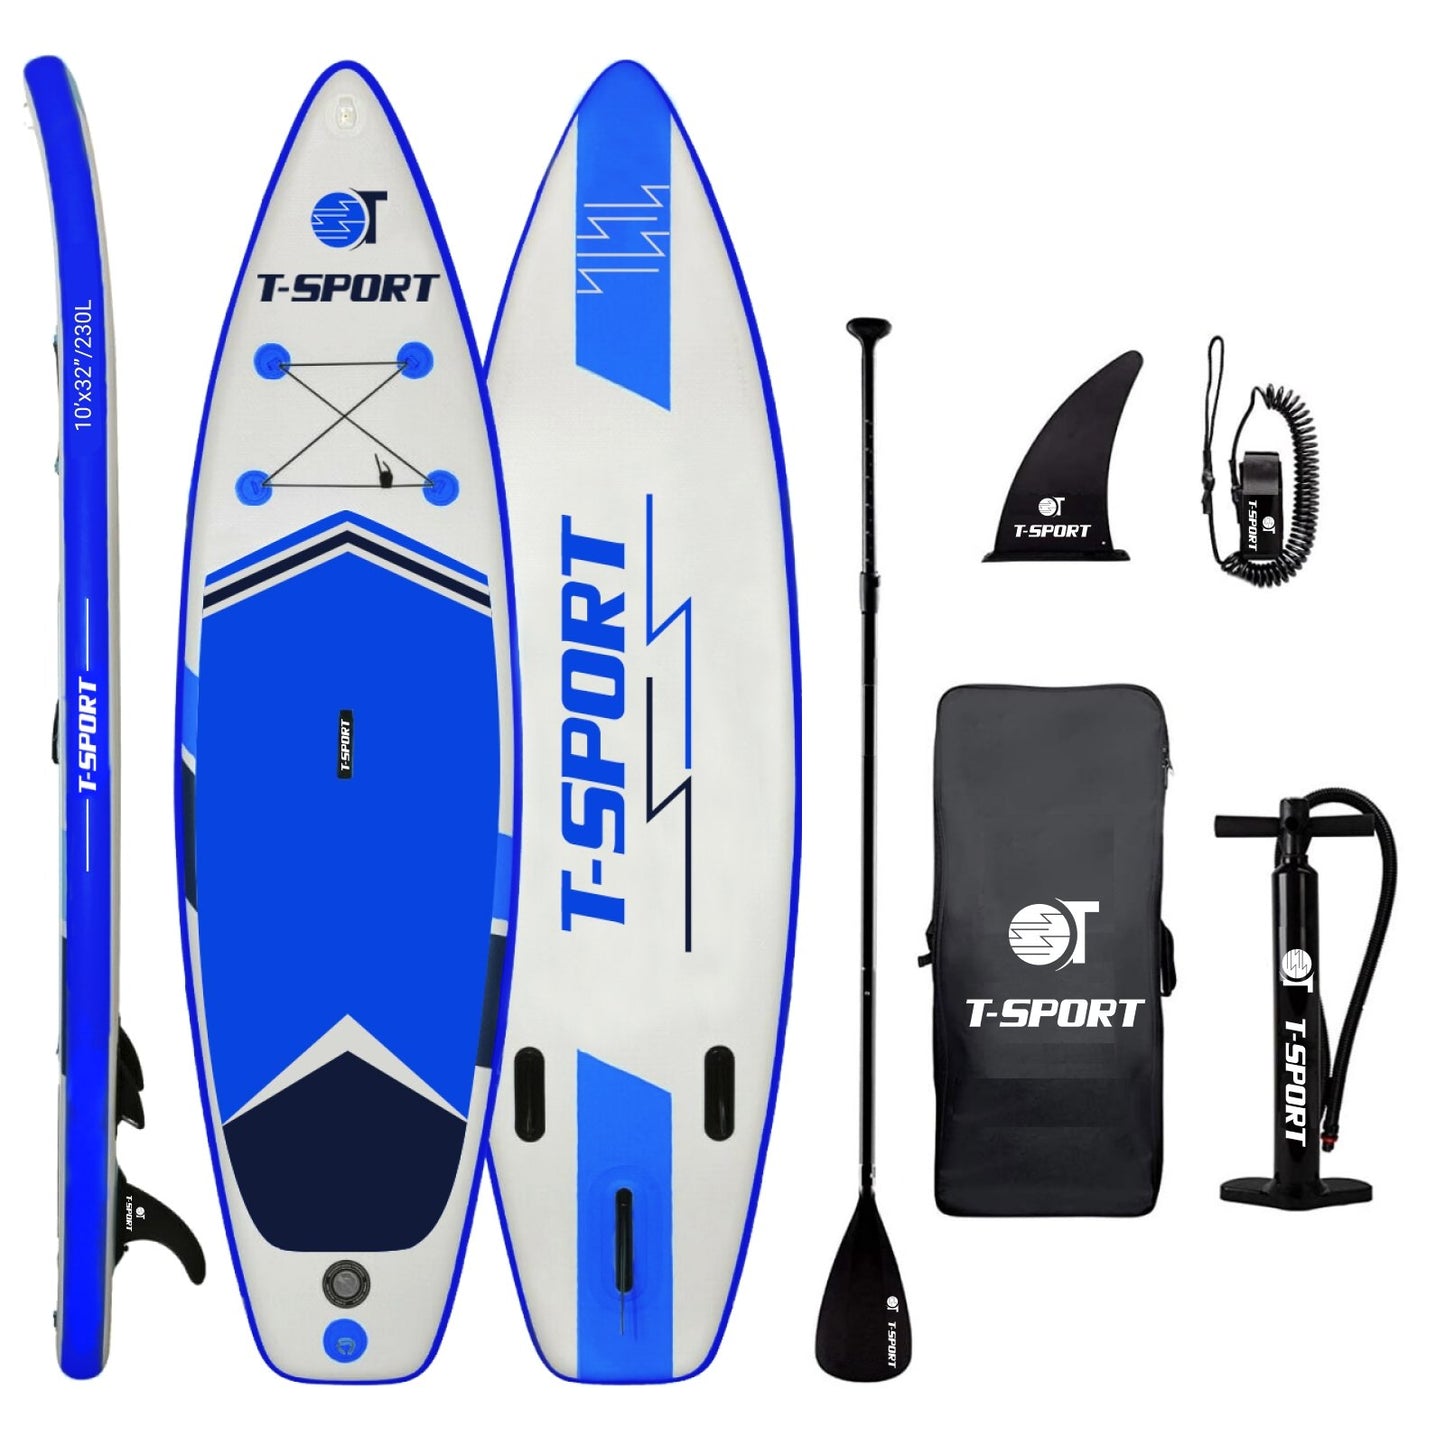 INFLATABLE PADDLE BOARD iSUP BLUE 10'6"